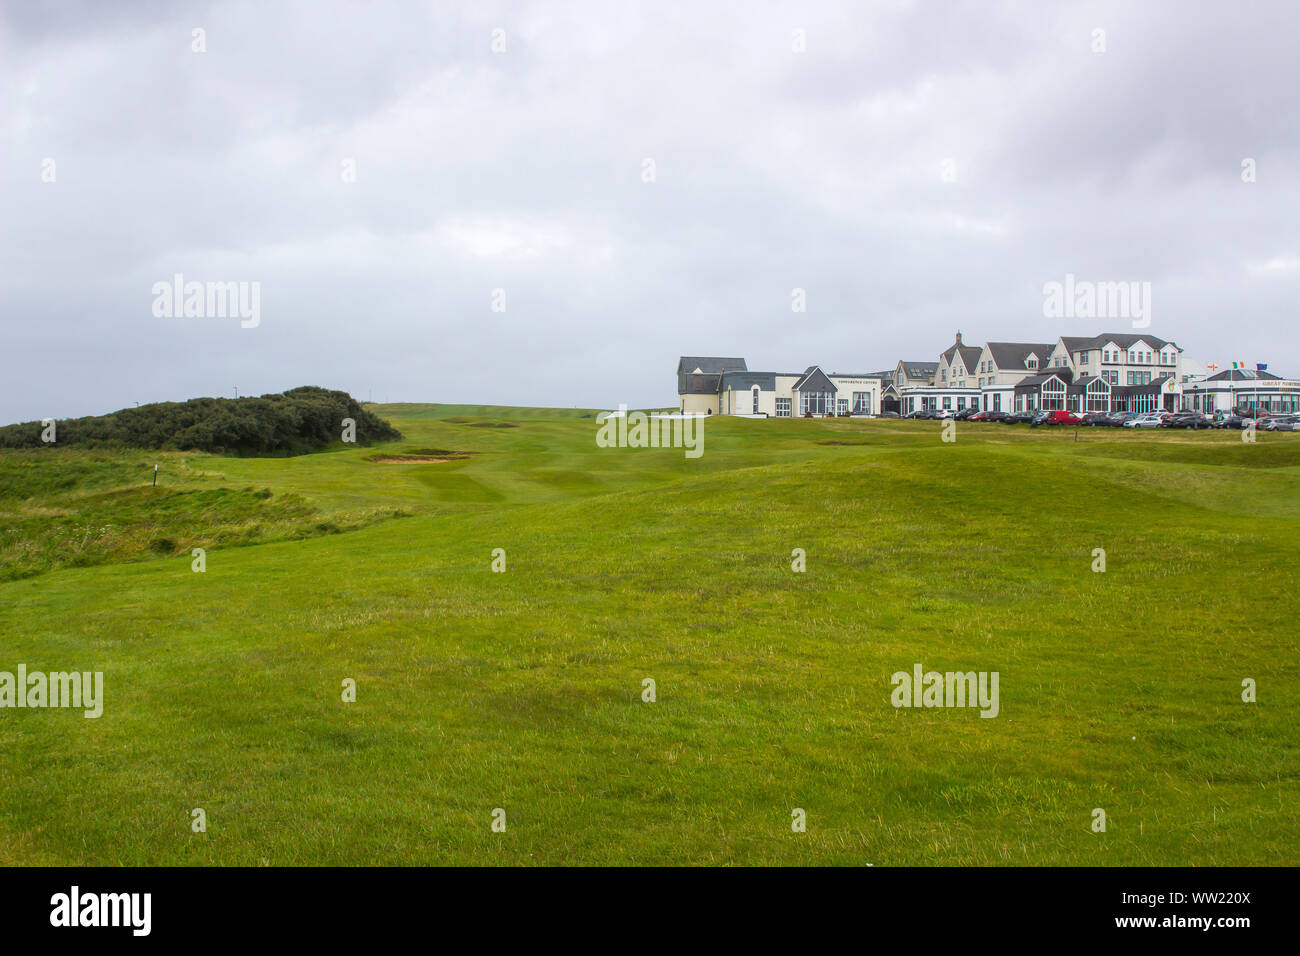 22 Augusrt 2019 The Great Northern Hotel on the Bundoran Golf Course in County Donegal Ireland on a damp day with dark ominous storm clouds overhead. Stock Photo